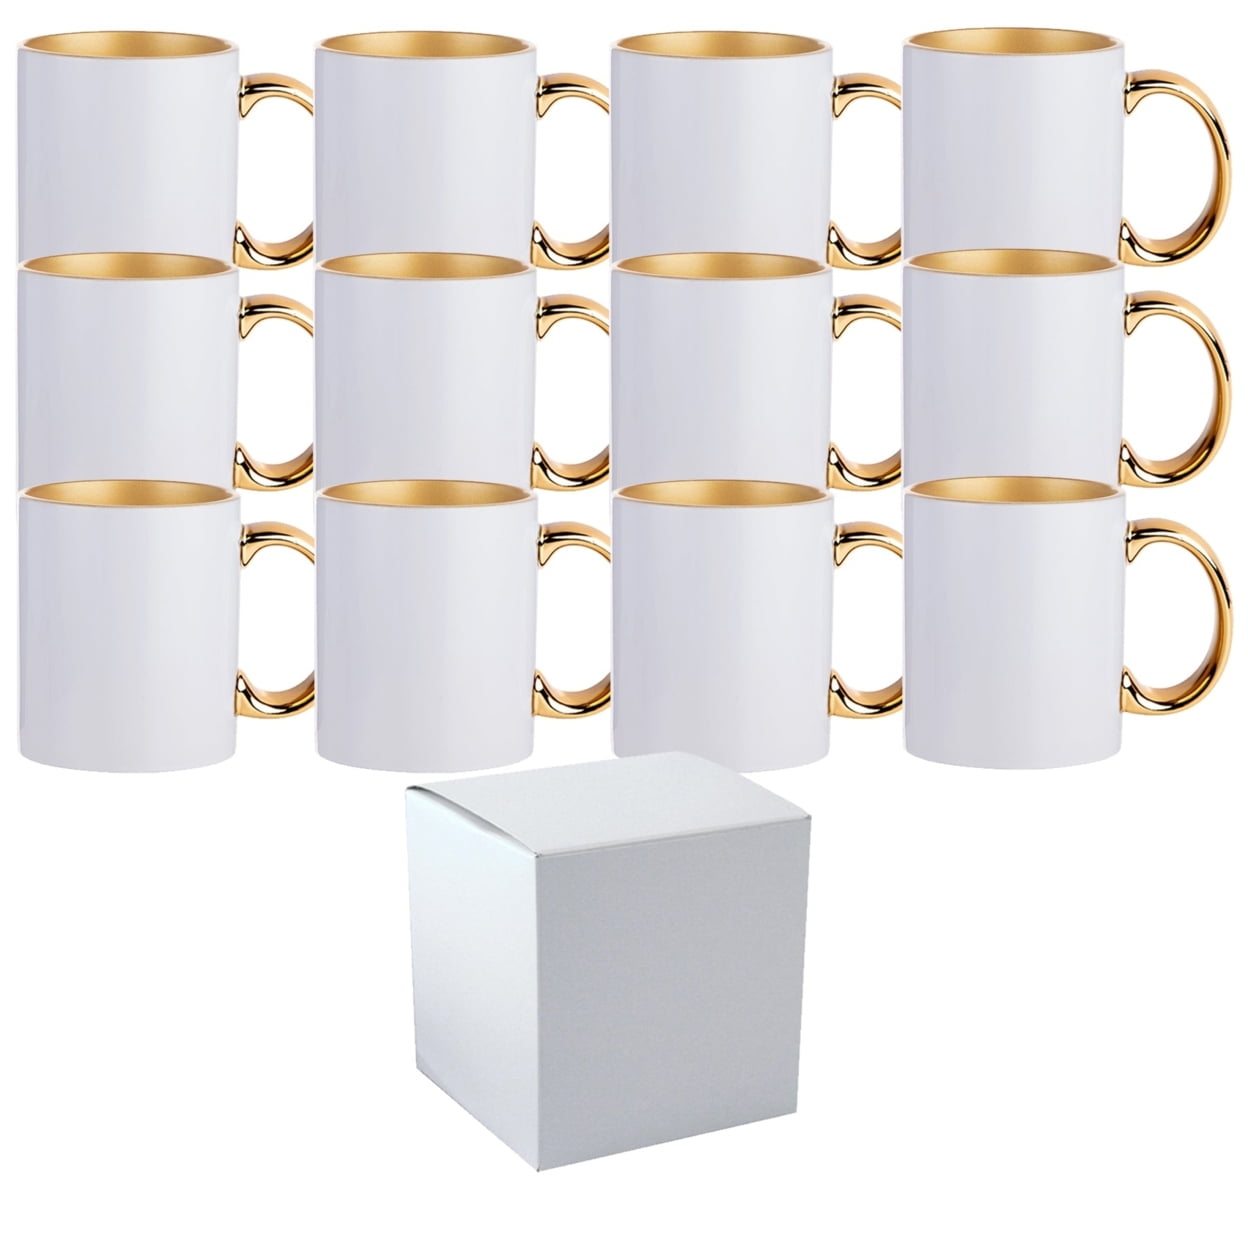 Mugsie | 12 Pcs High-Quality 15oz Sublimation Mugs Featuring Gold Rims and Handles, Including Foam Support Boxes for Safe and Convenient Storage